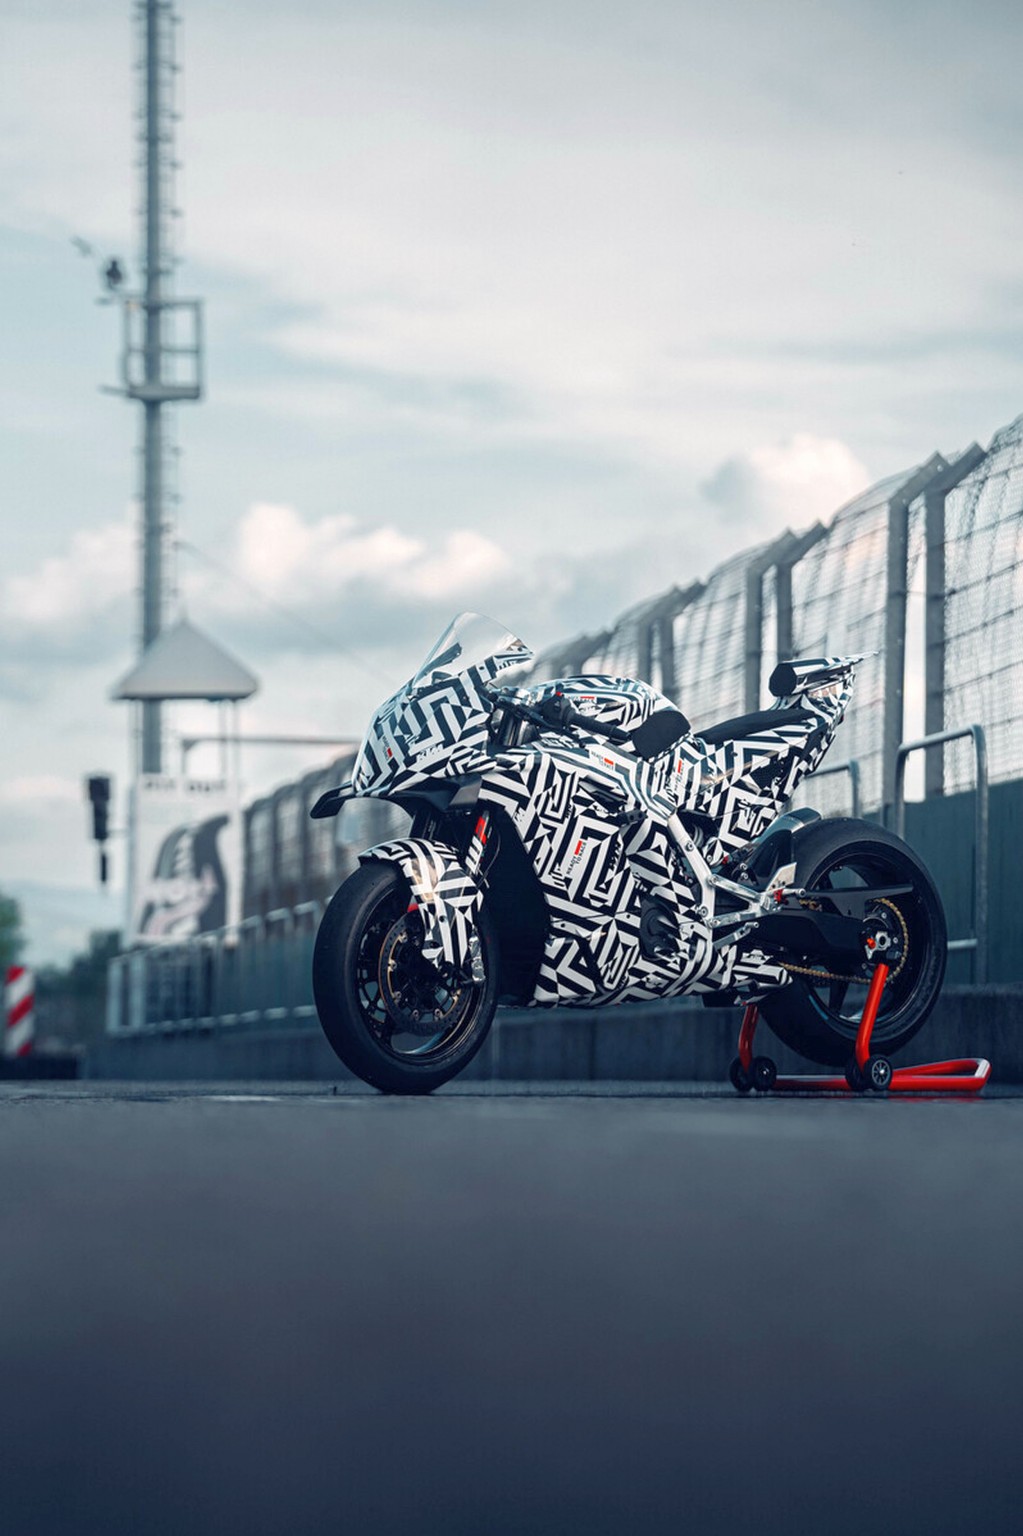 KTM 990 RC R - finally the thoroughbred sports bike for the road! - Image 6